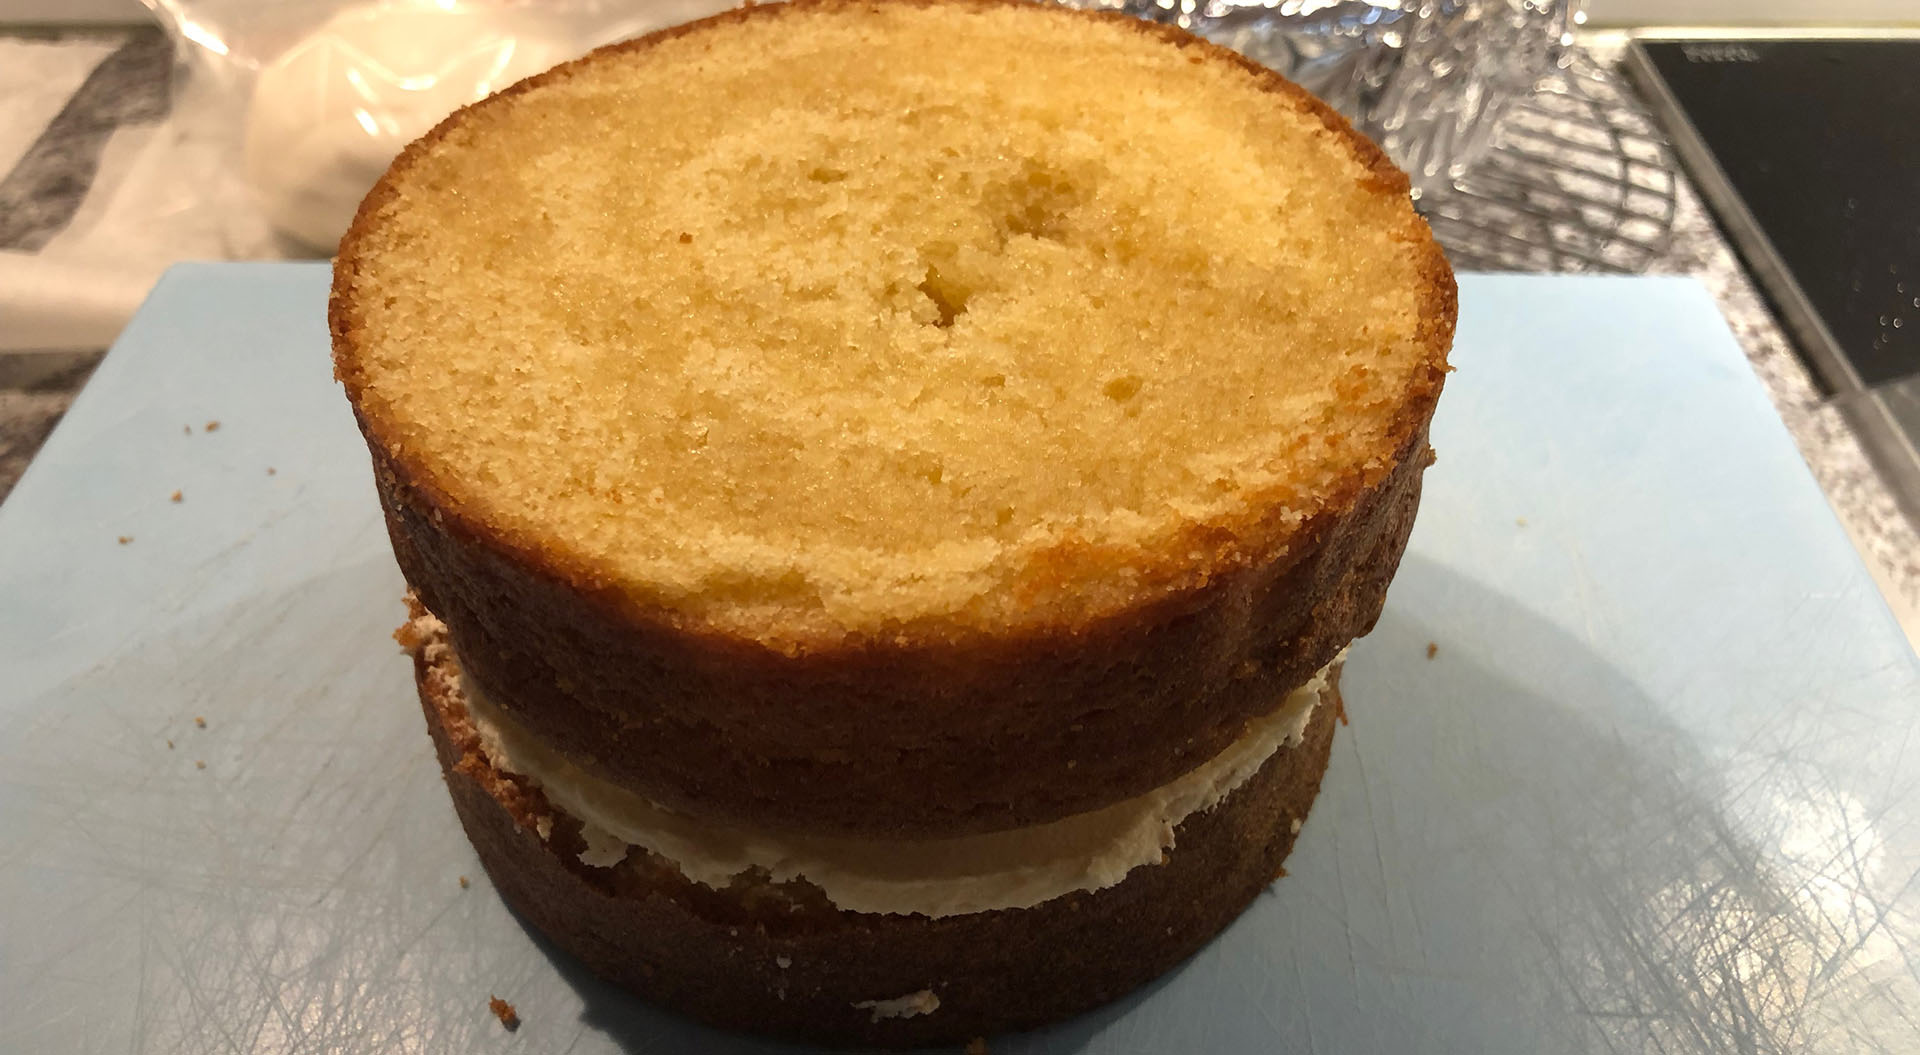 Simple Syrup soaked cake